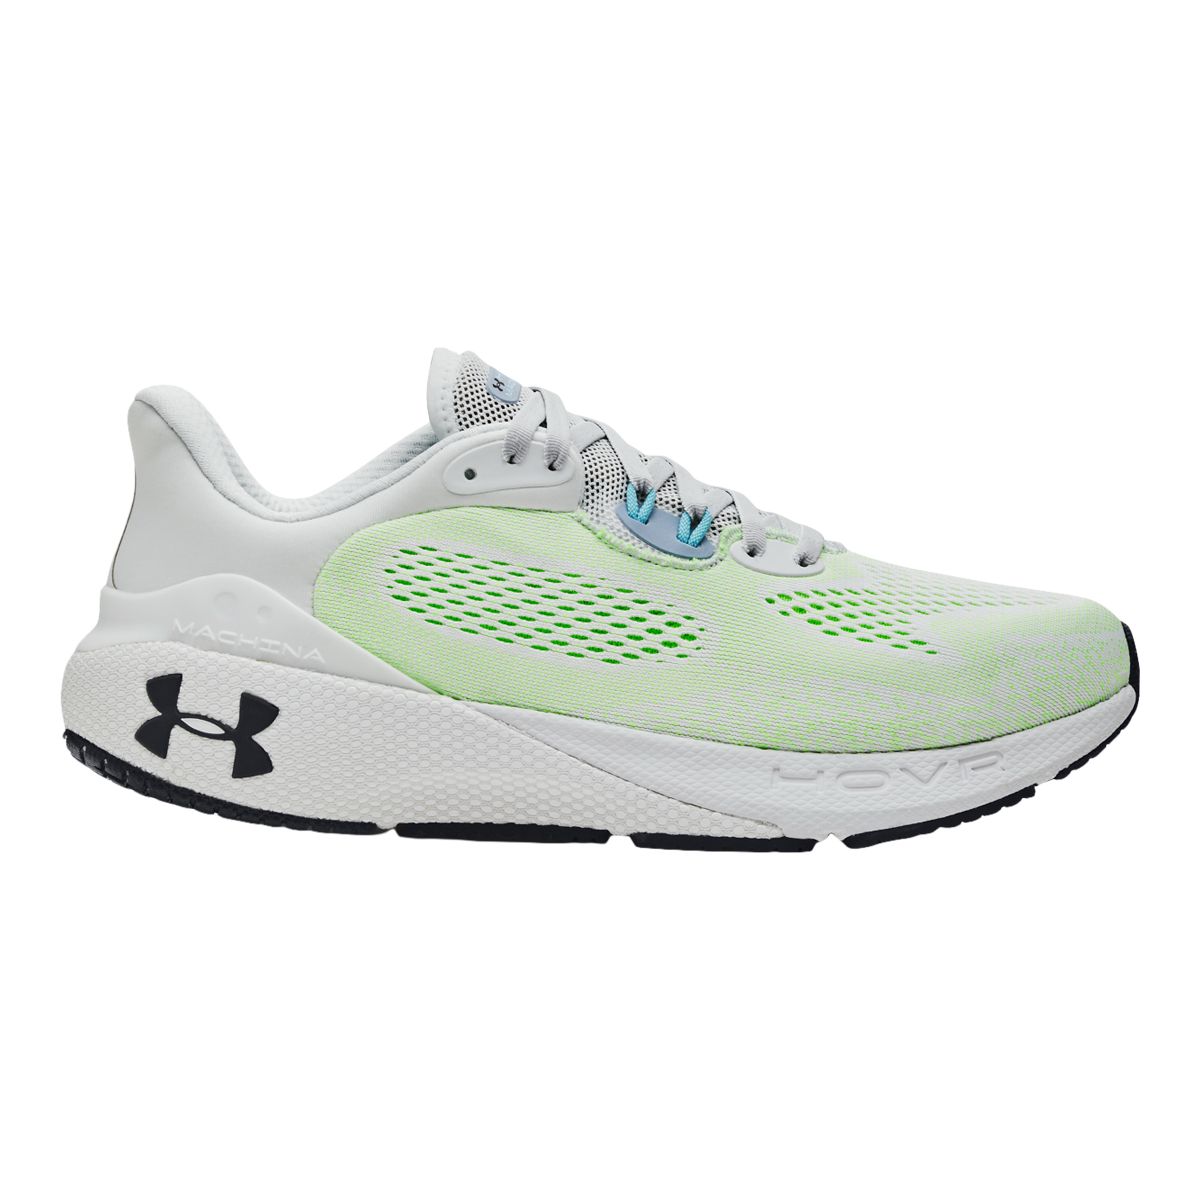 Under Armour Men's Hovr™ Machina 3 Daylight Running Shoes